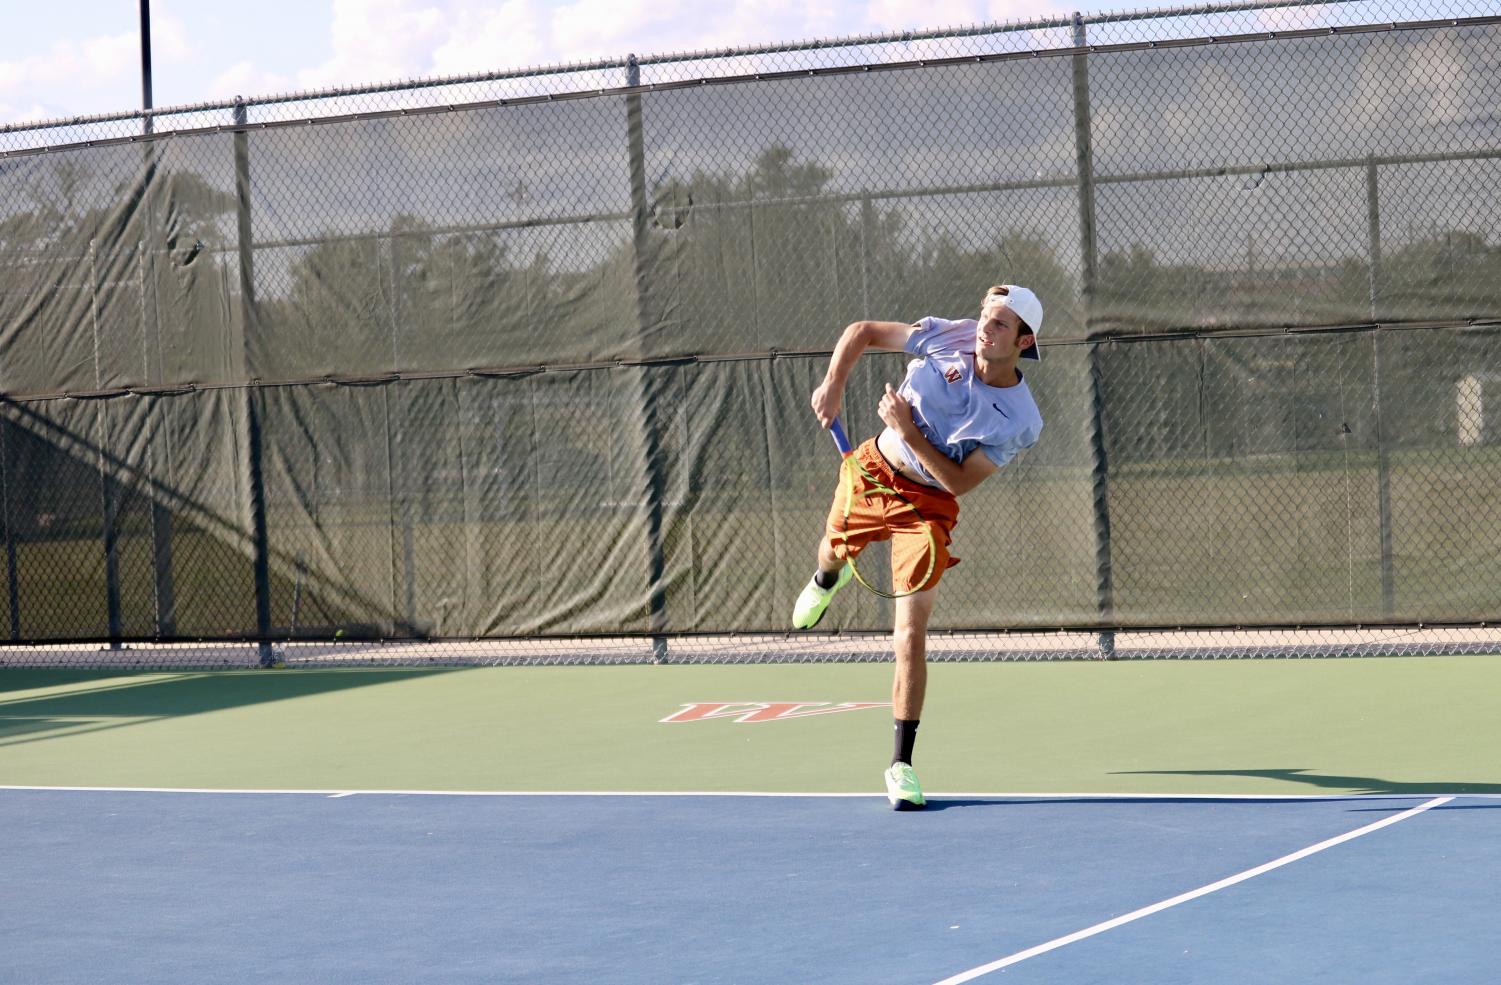 Varsity+Tennis+Secures+11th+District+Title+in+a+Row+with+11-1+Victory+over+Vandegrift